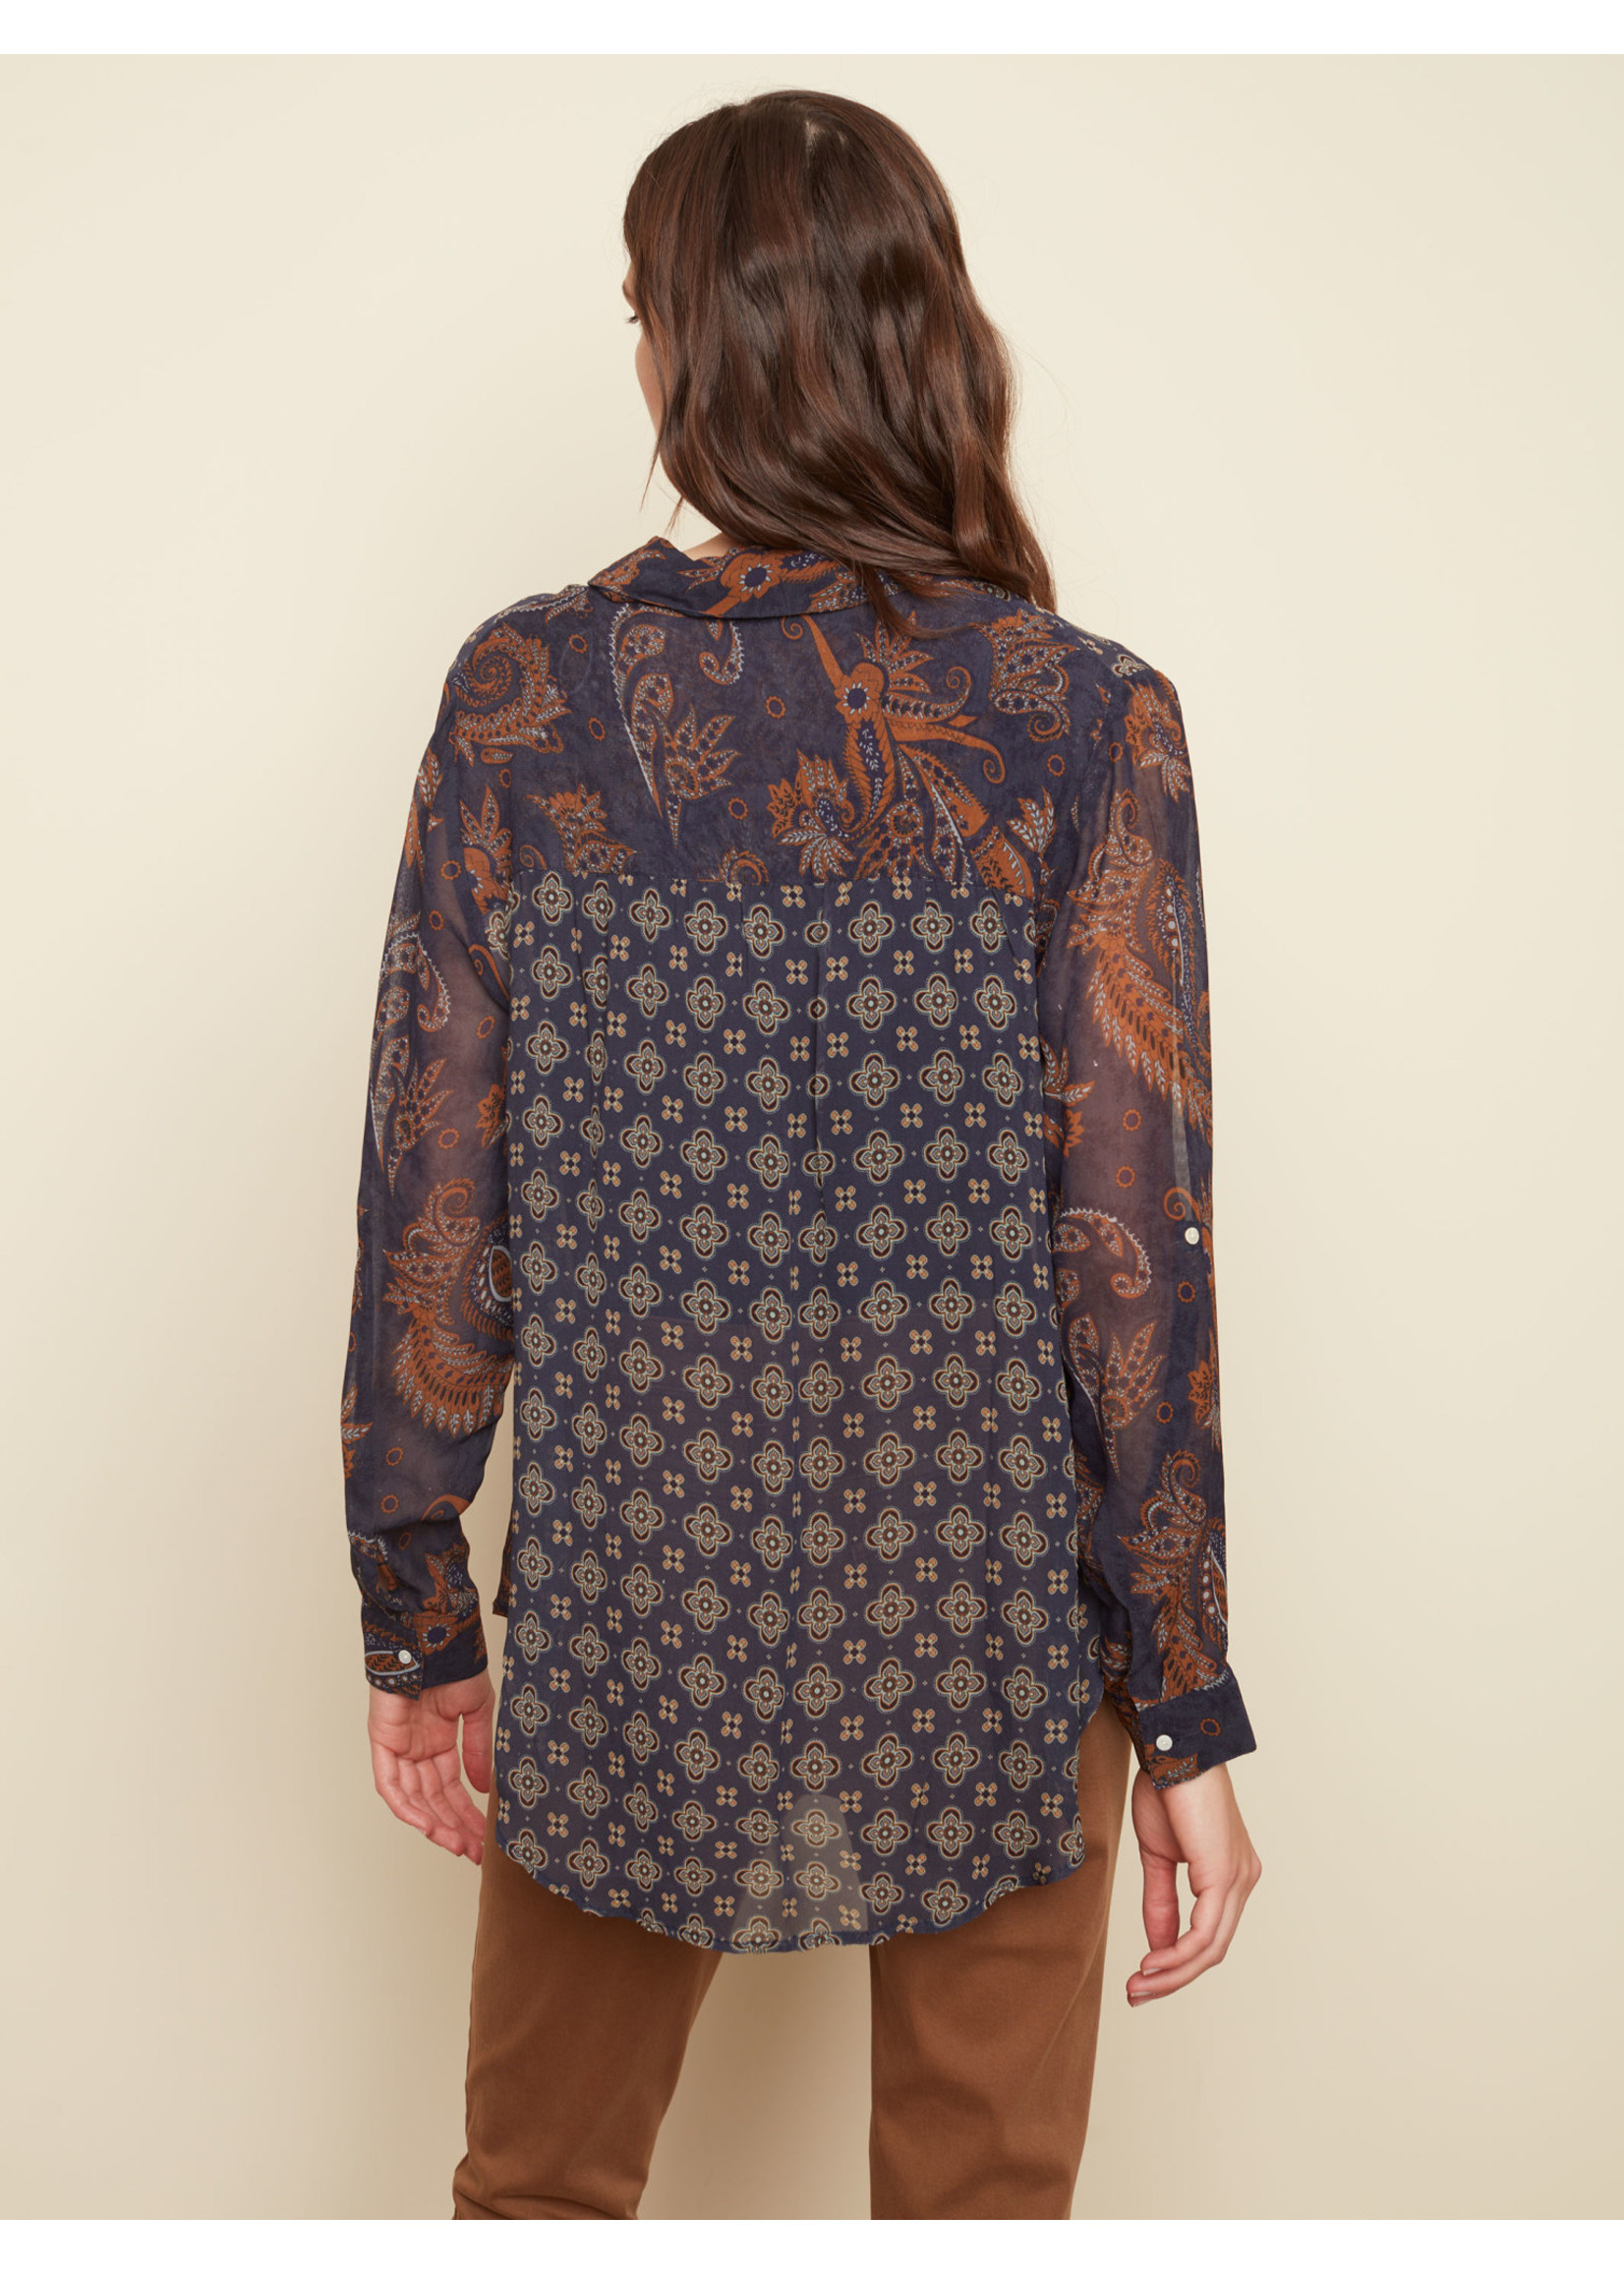 Charlie B Lainey Printed Blouse